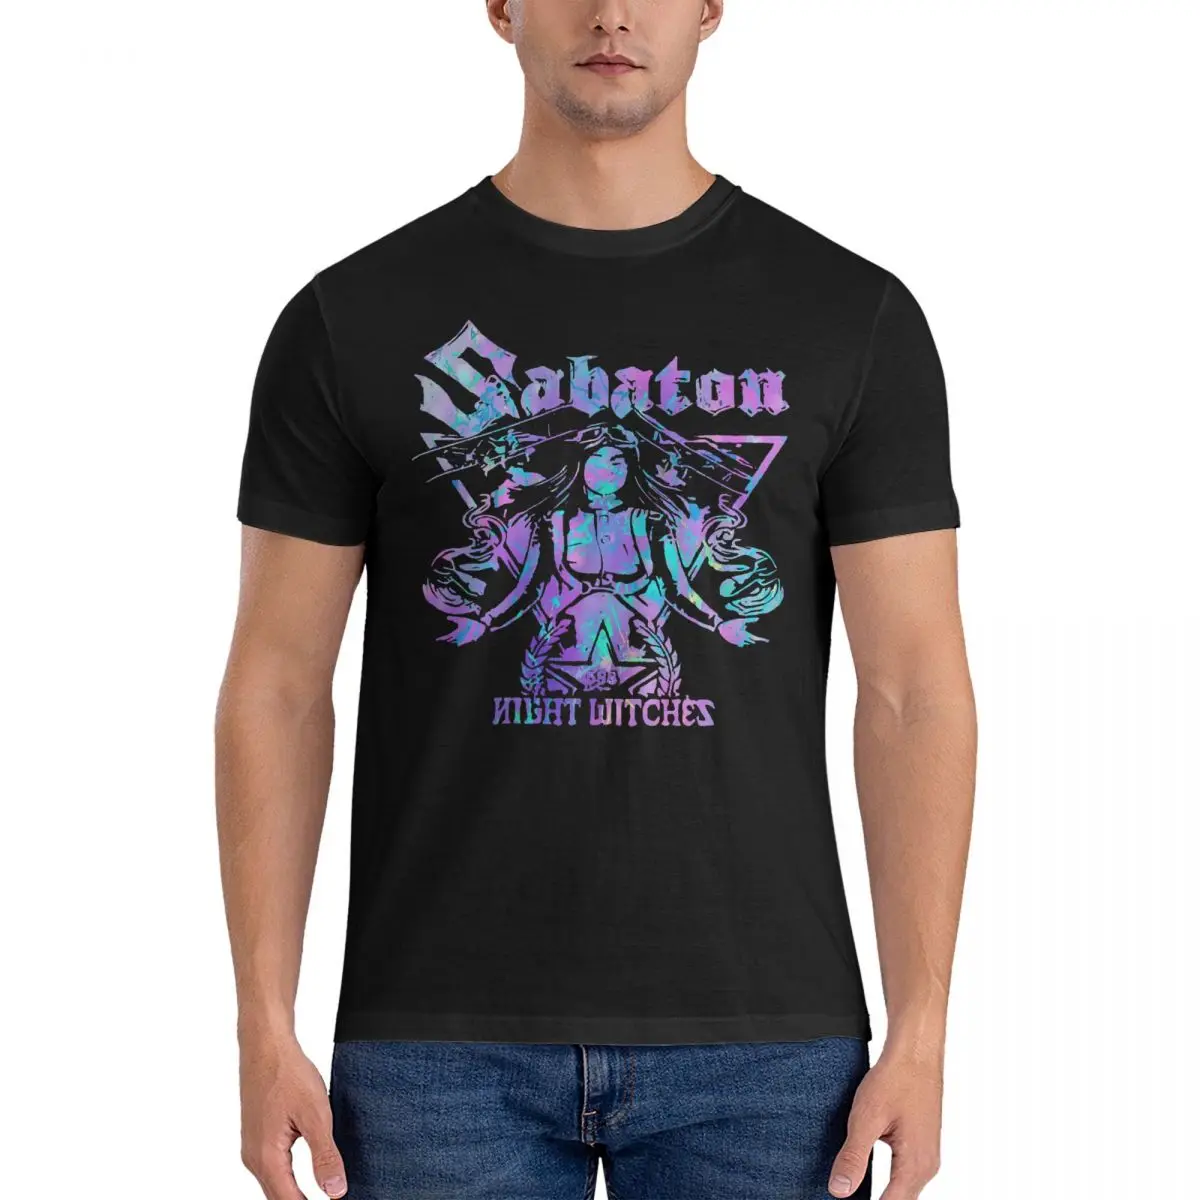 

Night Witches T-Shirt for Men S-SABATON Band Funny Pure Cotton Tees Round Collar Short Sleeve T Shirts New Arrival Tops